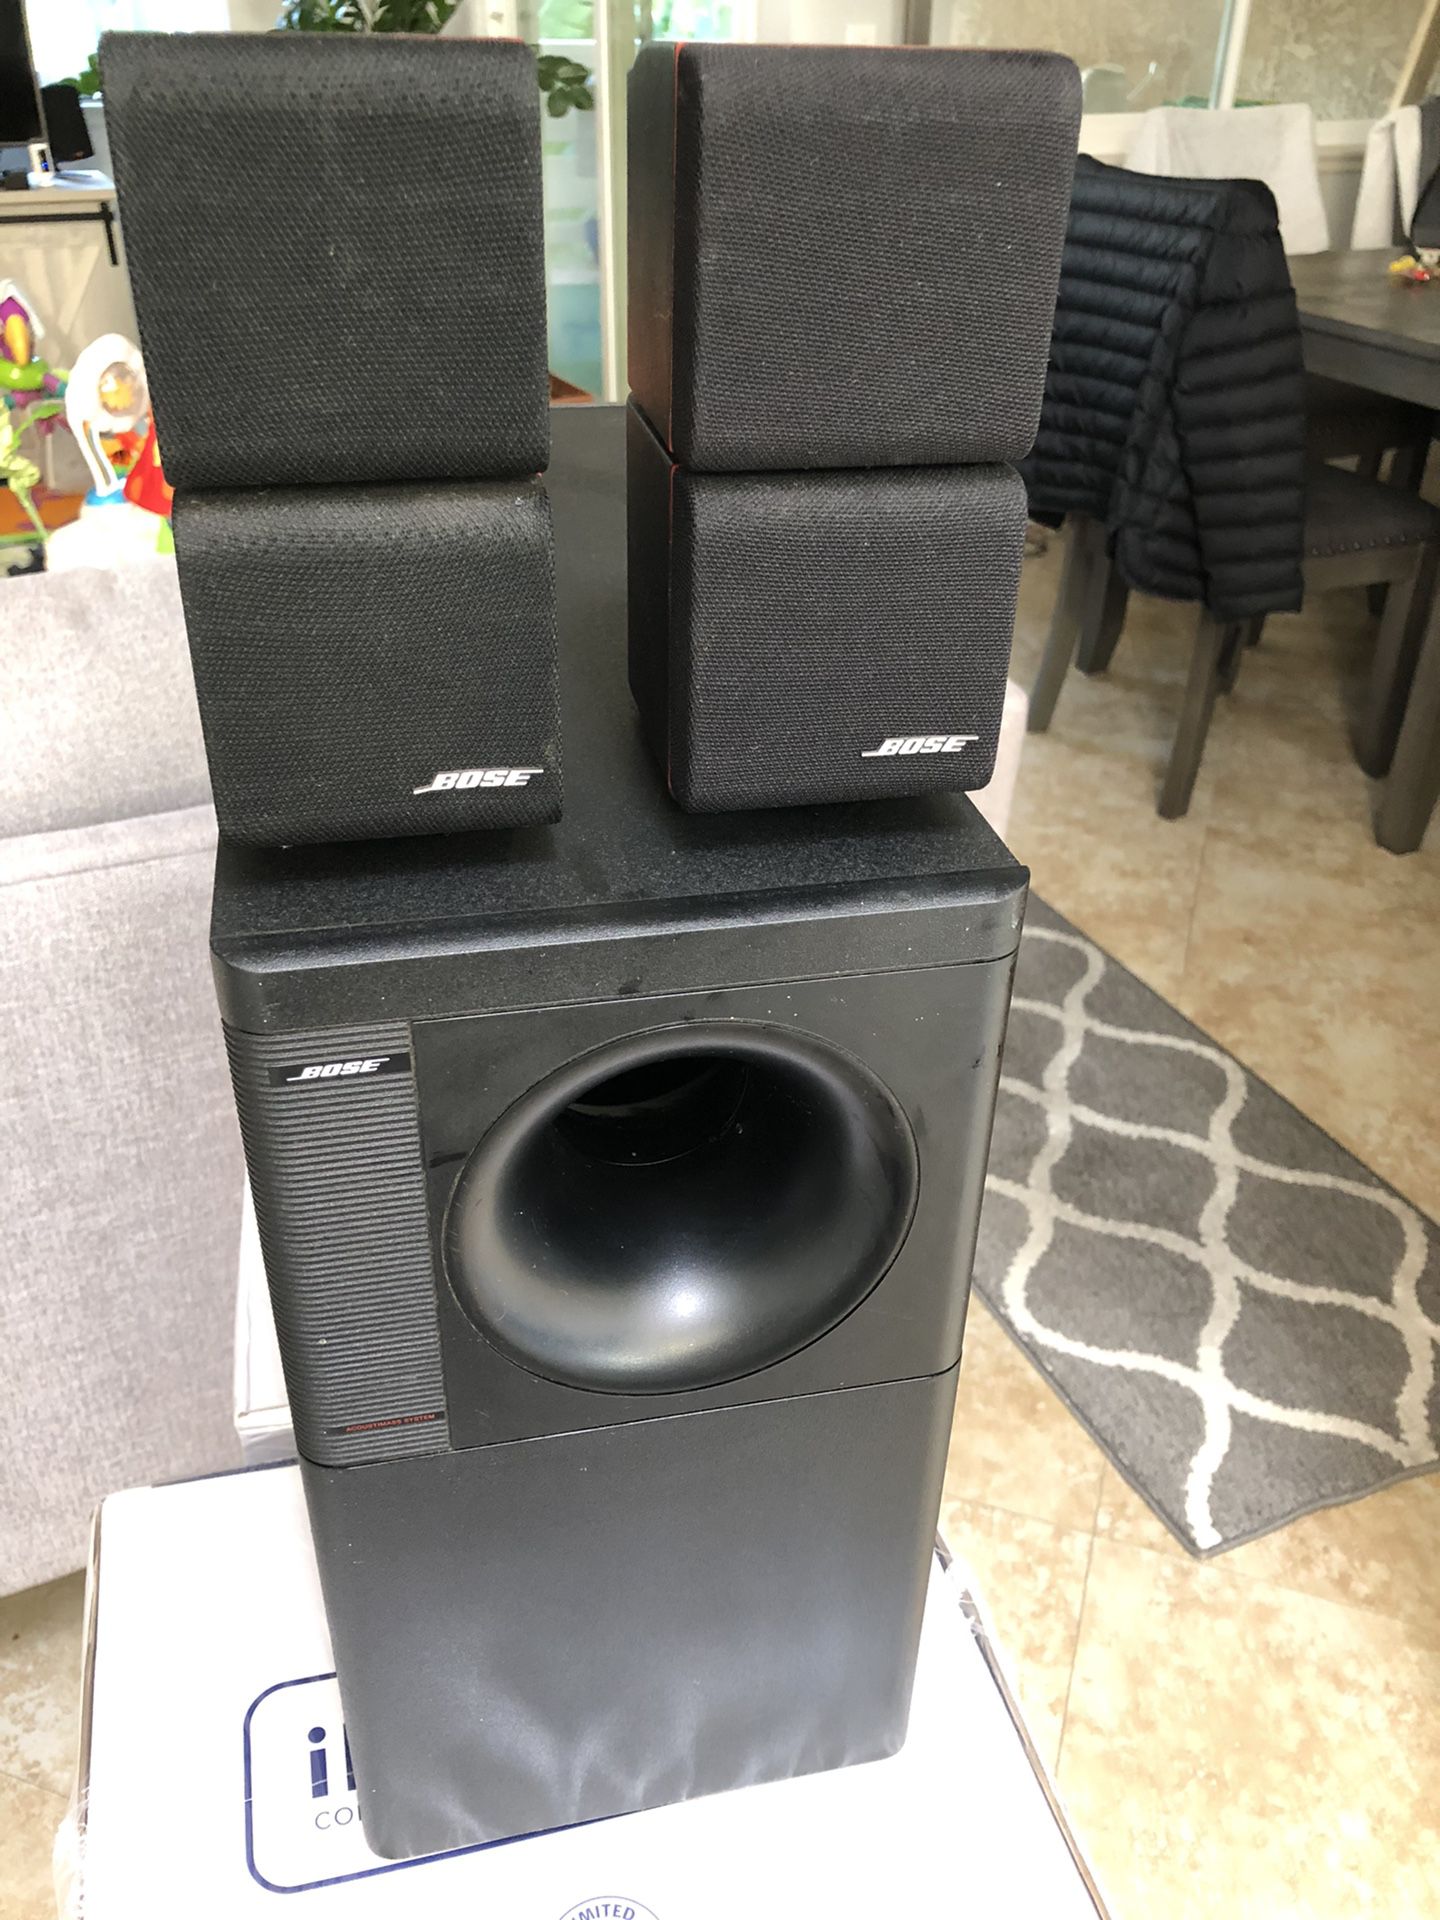 Seaport give Udvej Bose AcoustiMass 5 Series II - $110 for Sale in Santa Ana, CA - OfferUp